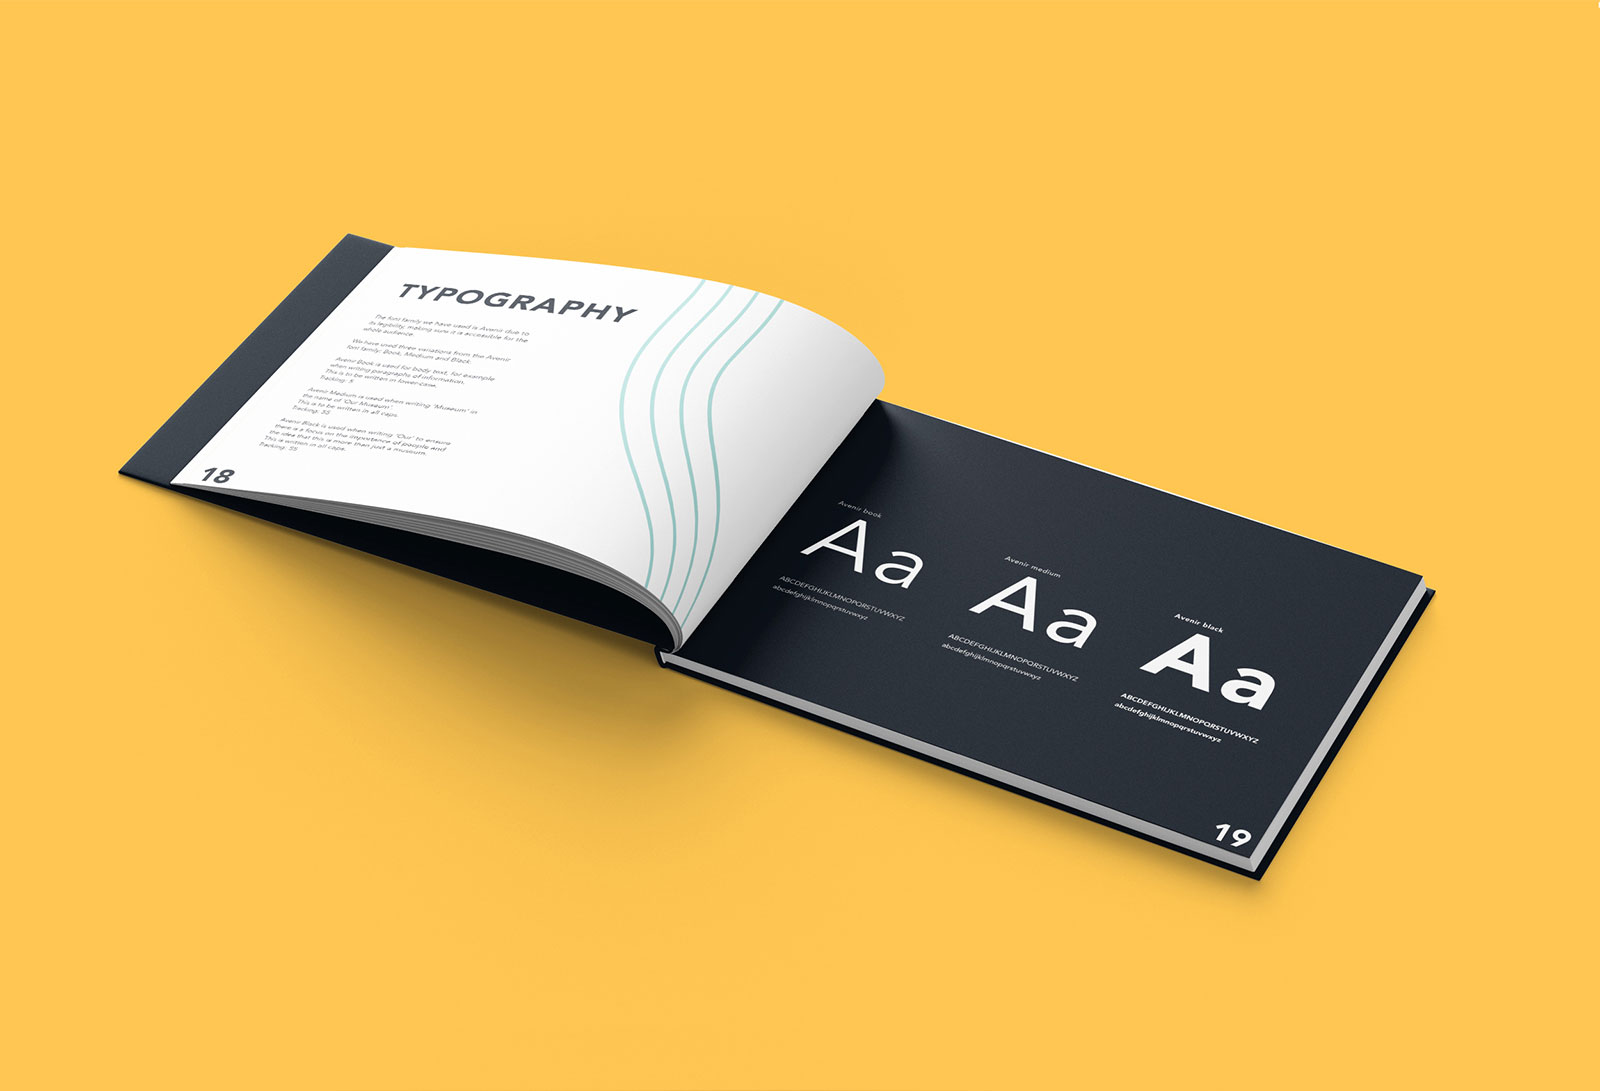 Mockup of brand guidelines